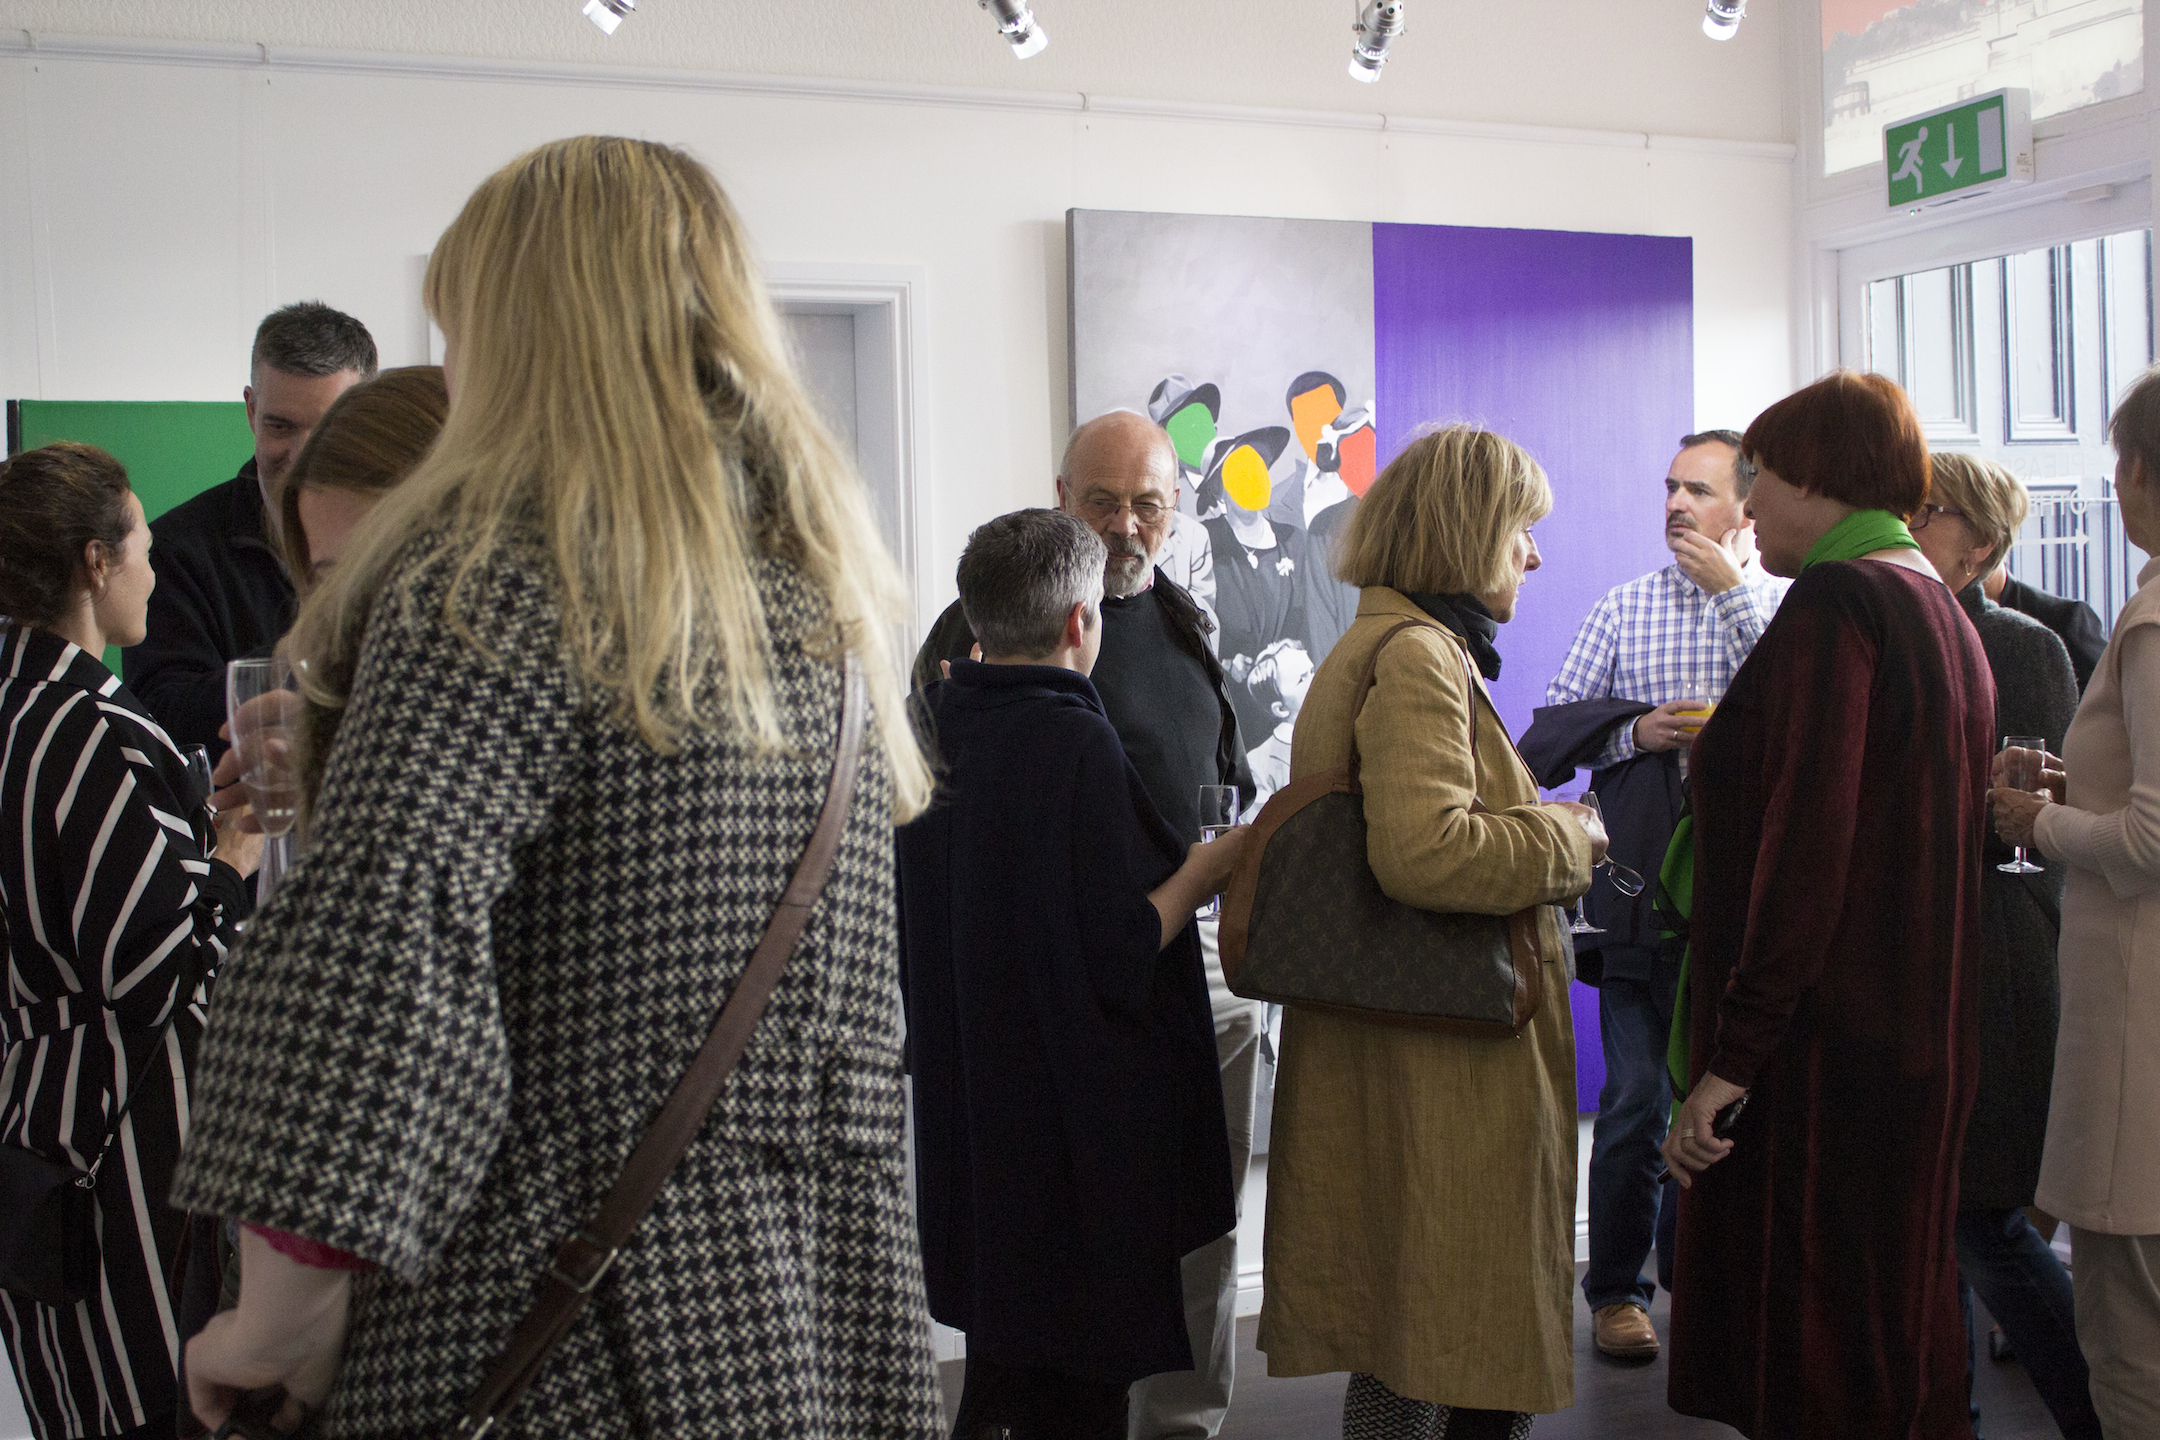 Thank you to everyone who attended Clare Andrews' exhibition opening. The event was a great success!